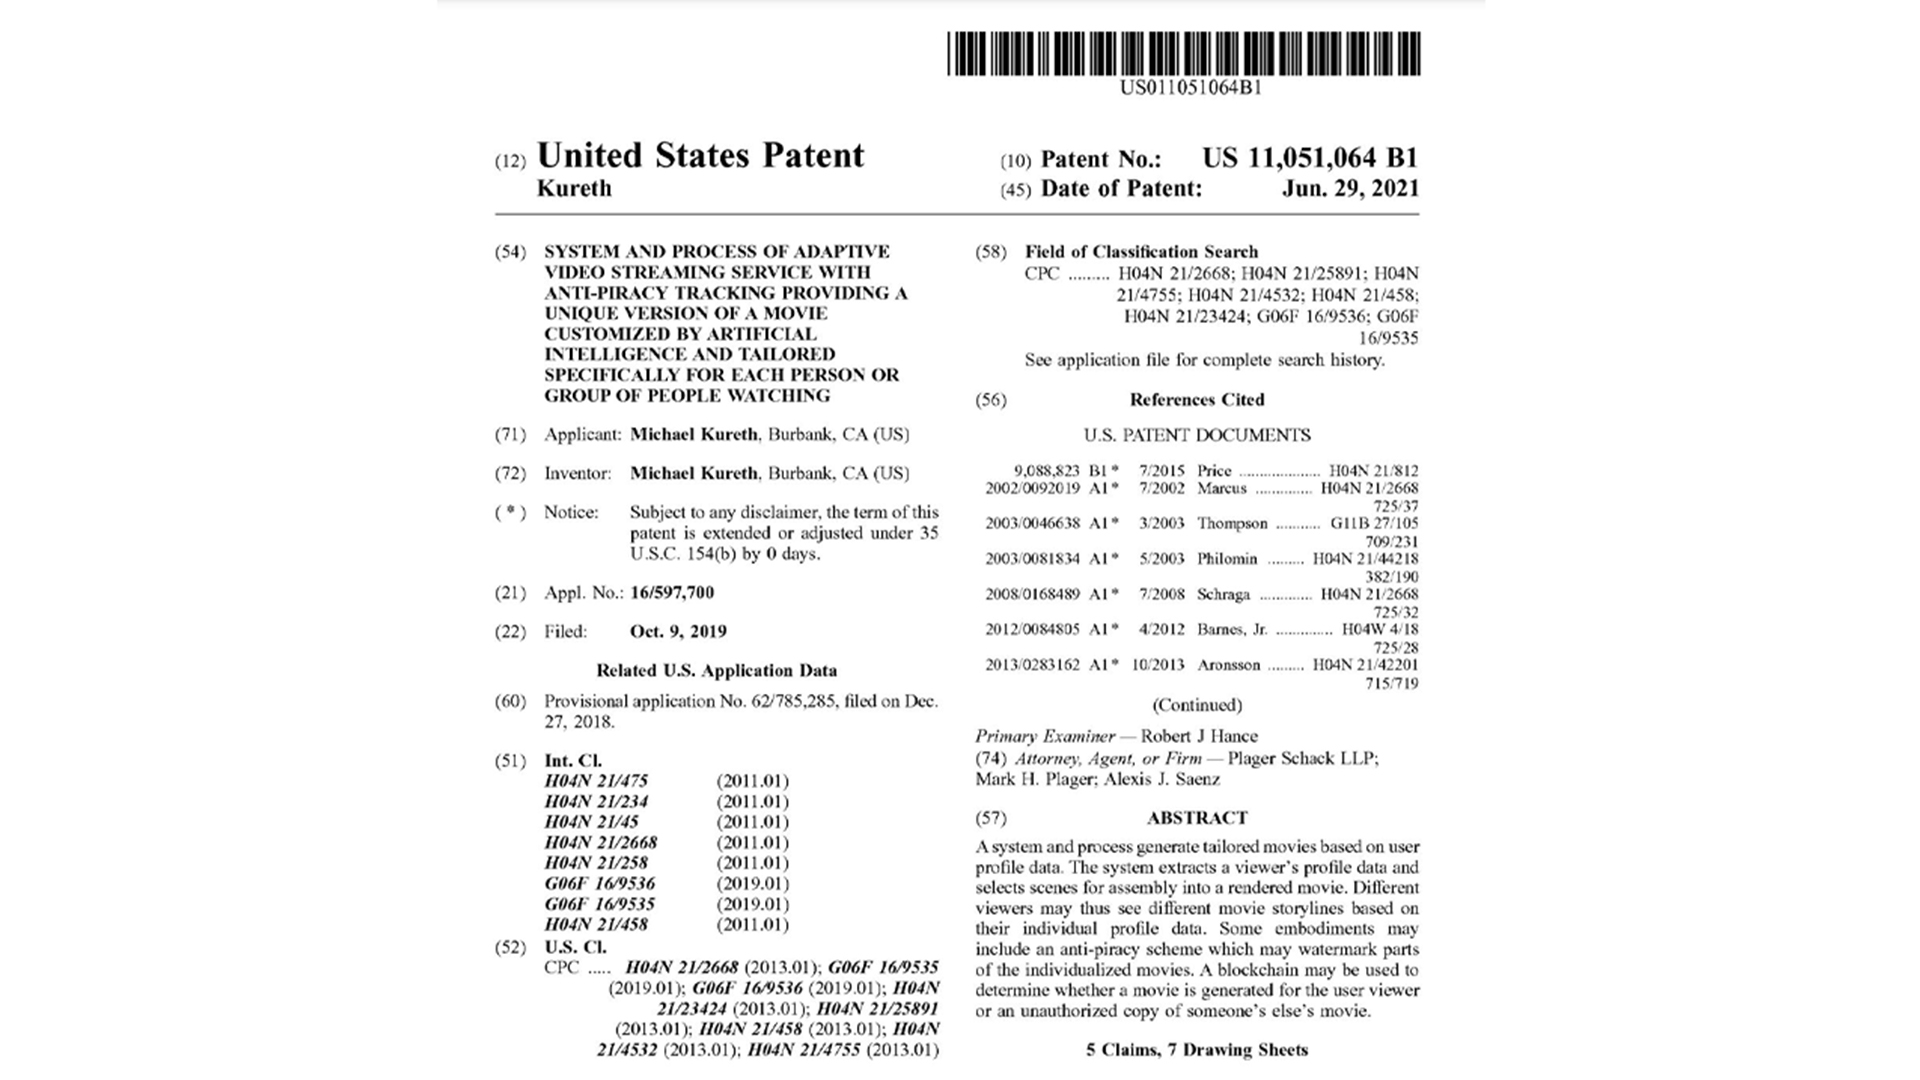 USPTO Issues Patent to Cinedapt to Adapt and Evolve the Film Industry From Extinction